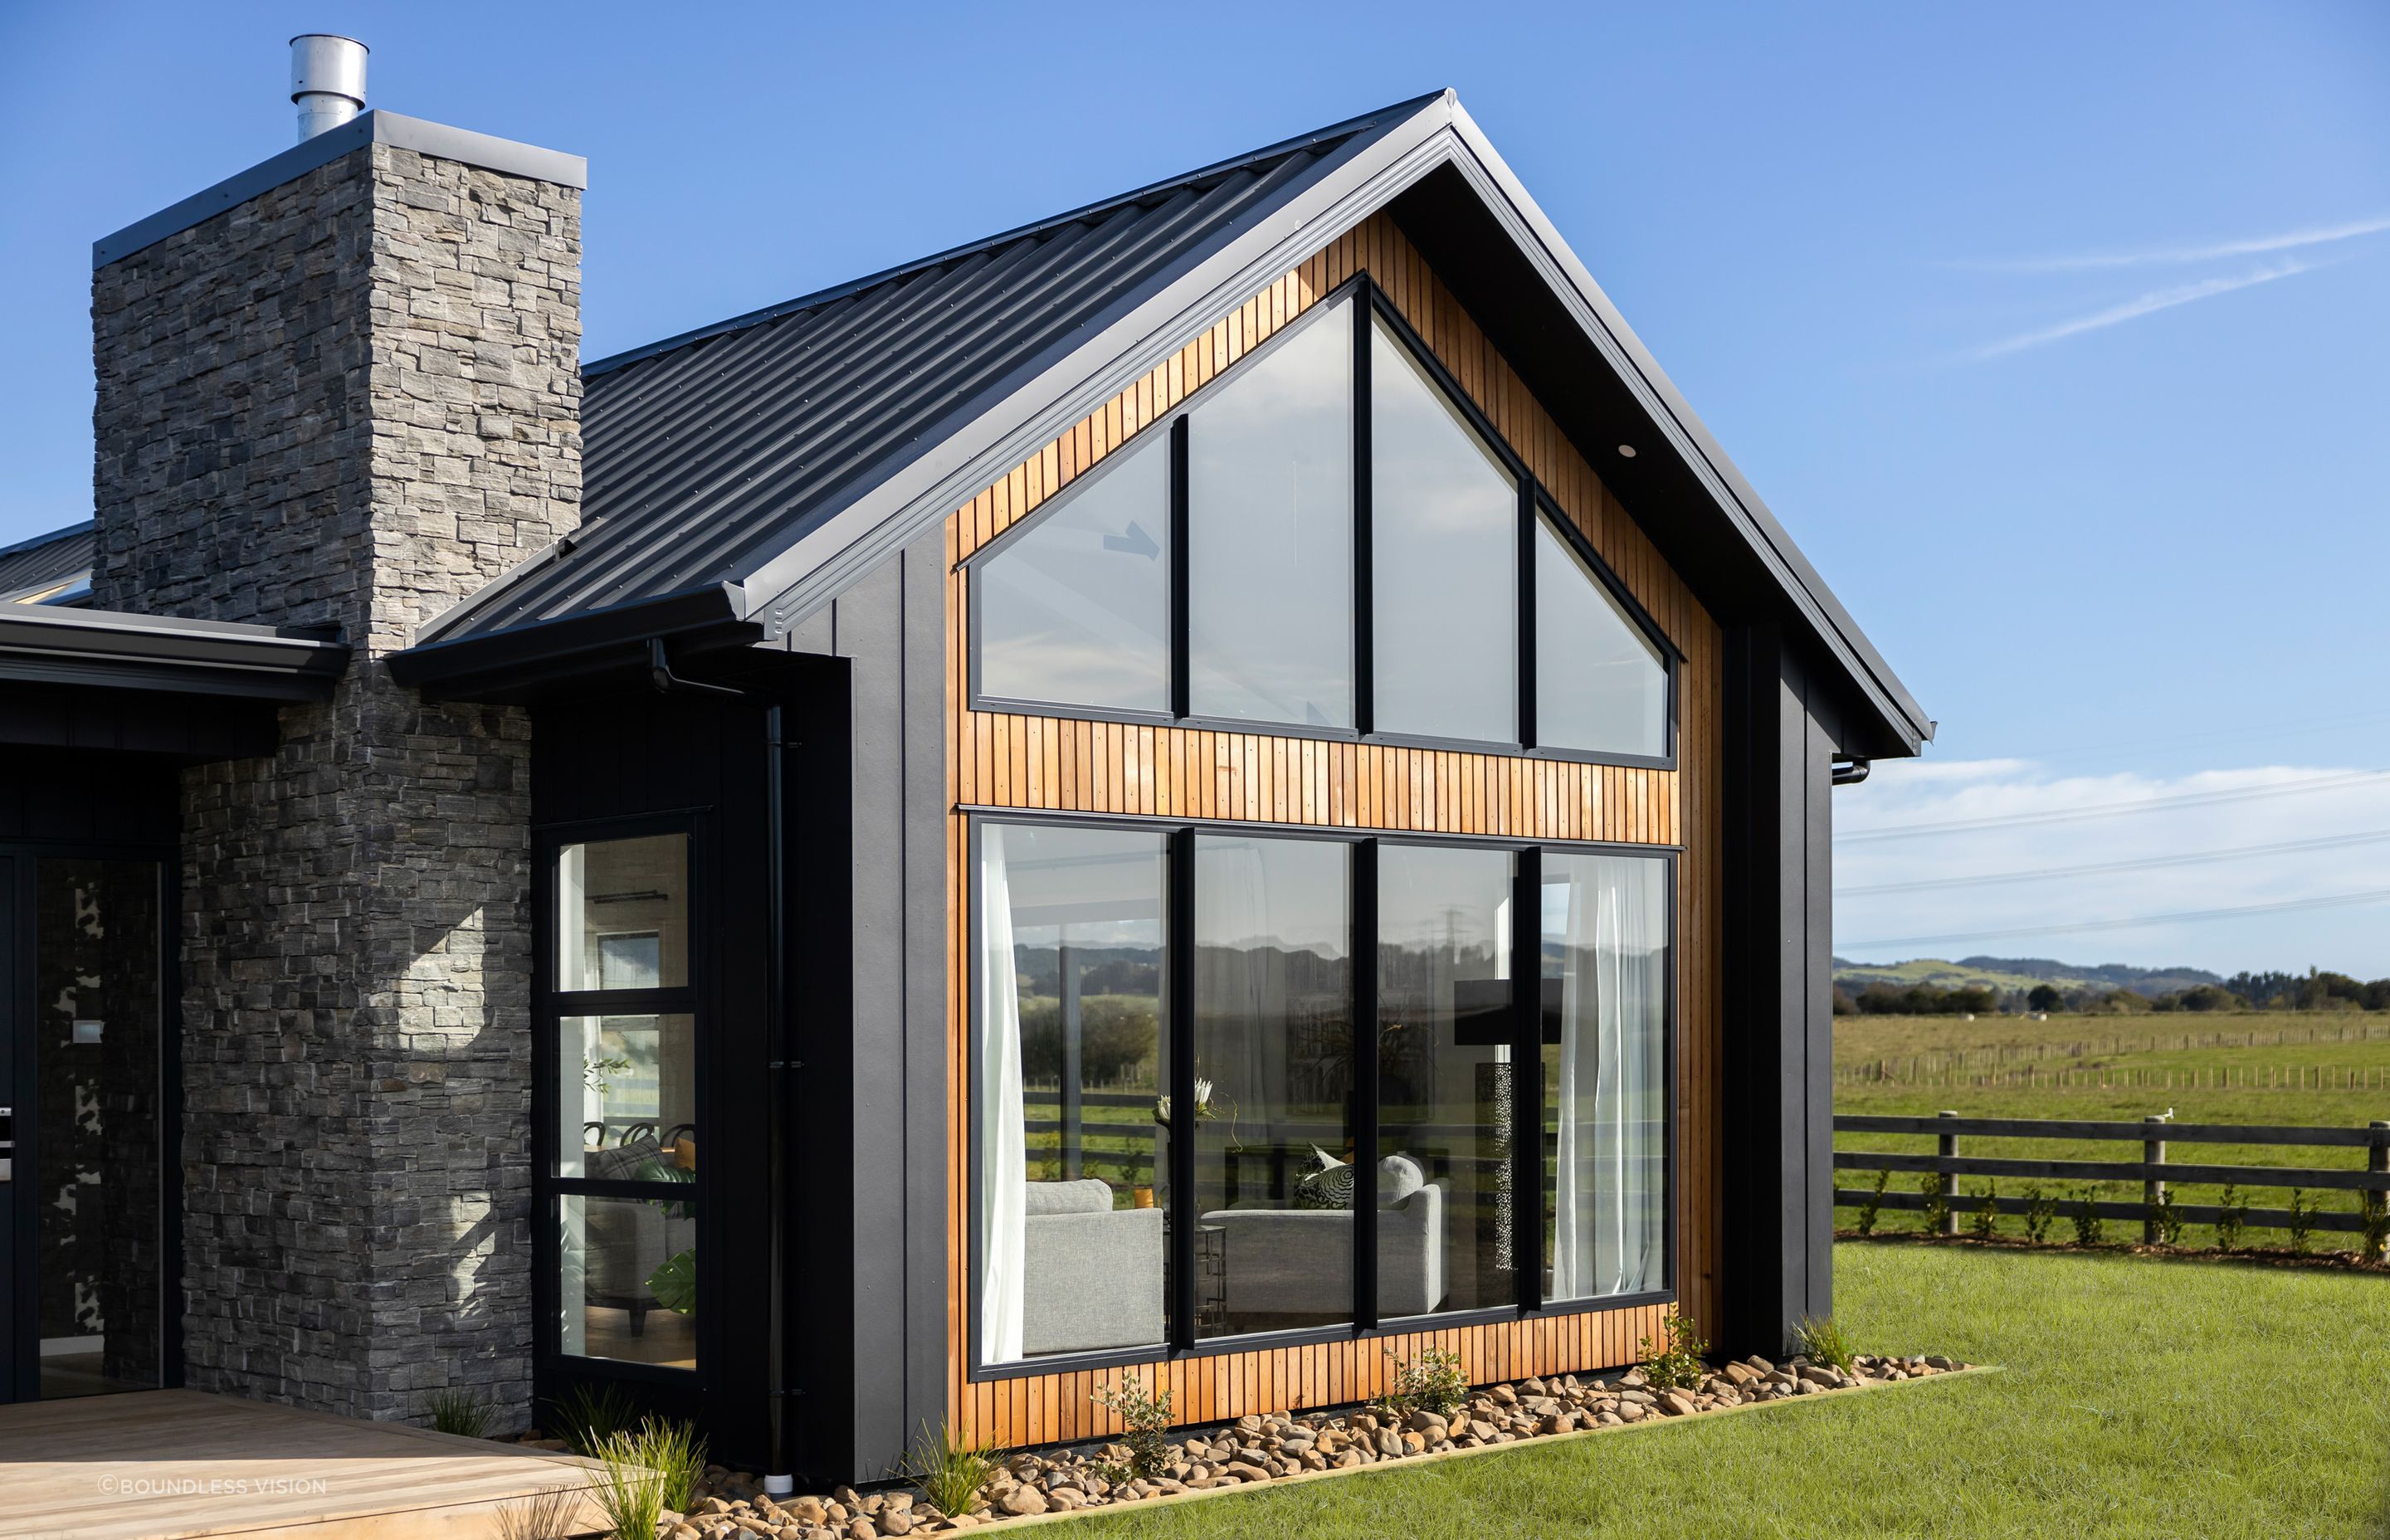 The four-bedroom house is characterised by a traditional, full-sloping gable roof.